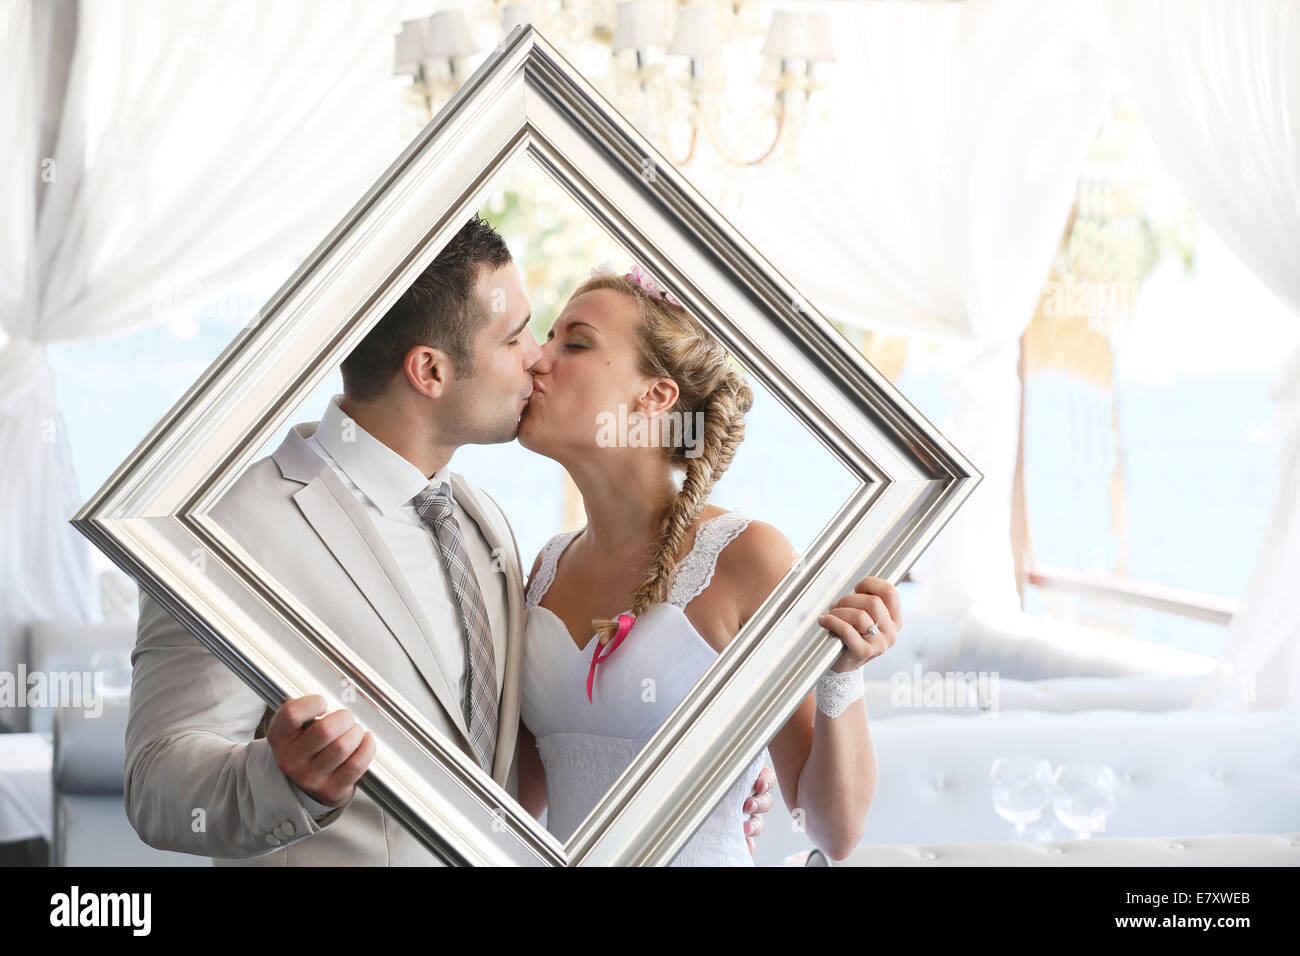 Bride and groom holding a picture frame in front of them, kissing, photo shoot Stock Photo